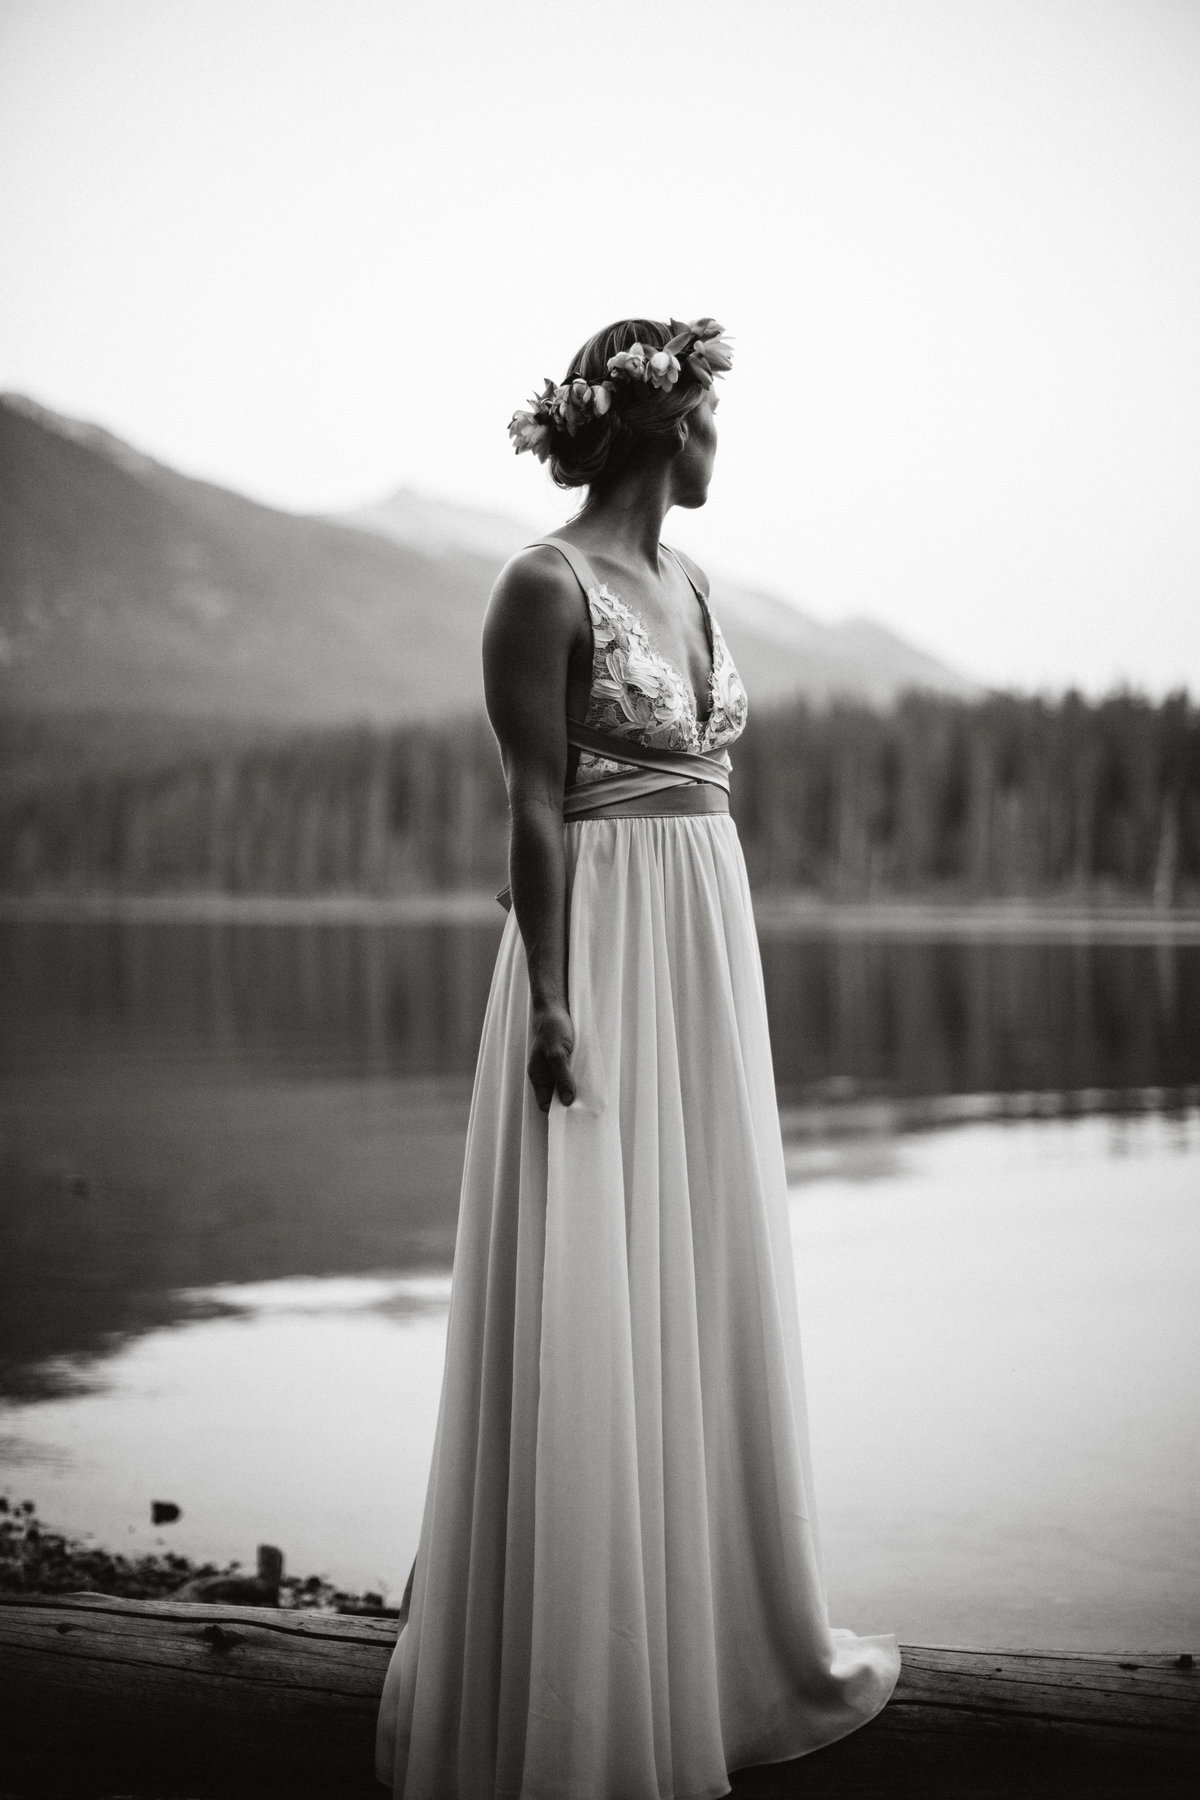 Gorgeous portrait of the bride at this styled shoot in Montana.